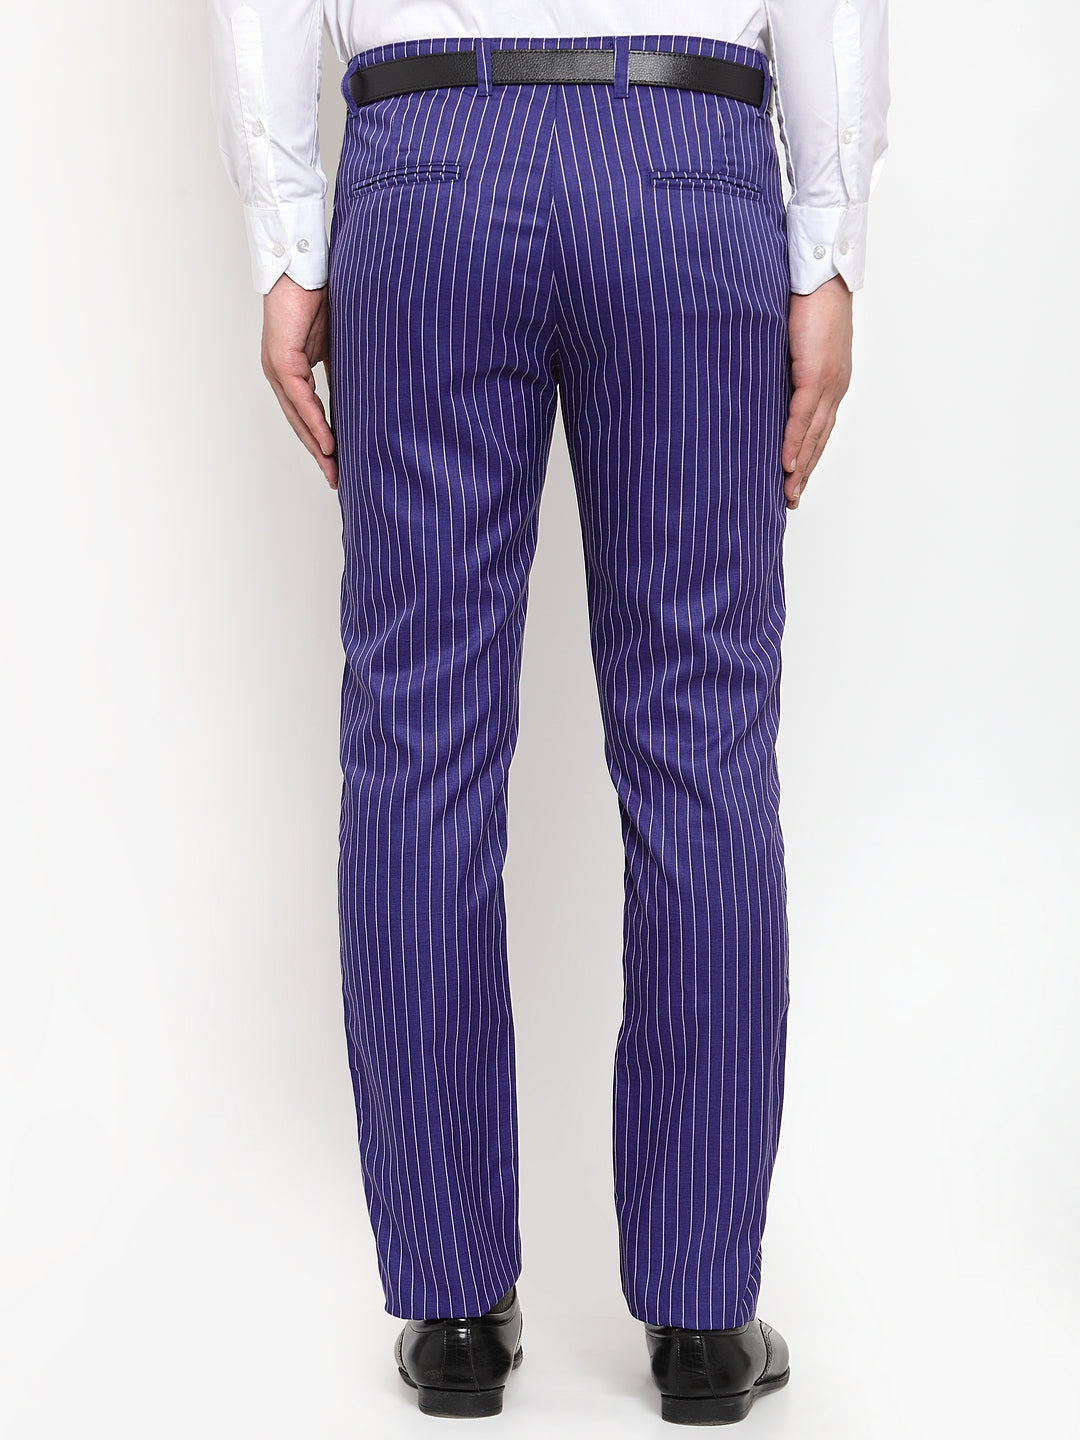 Ajrakh Cotton Striped Pants with Pockets Fully Elasticated Multicolo   Scarlet Thread